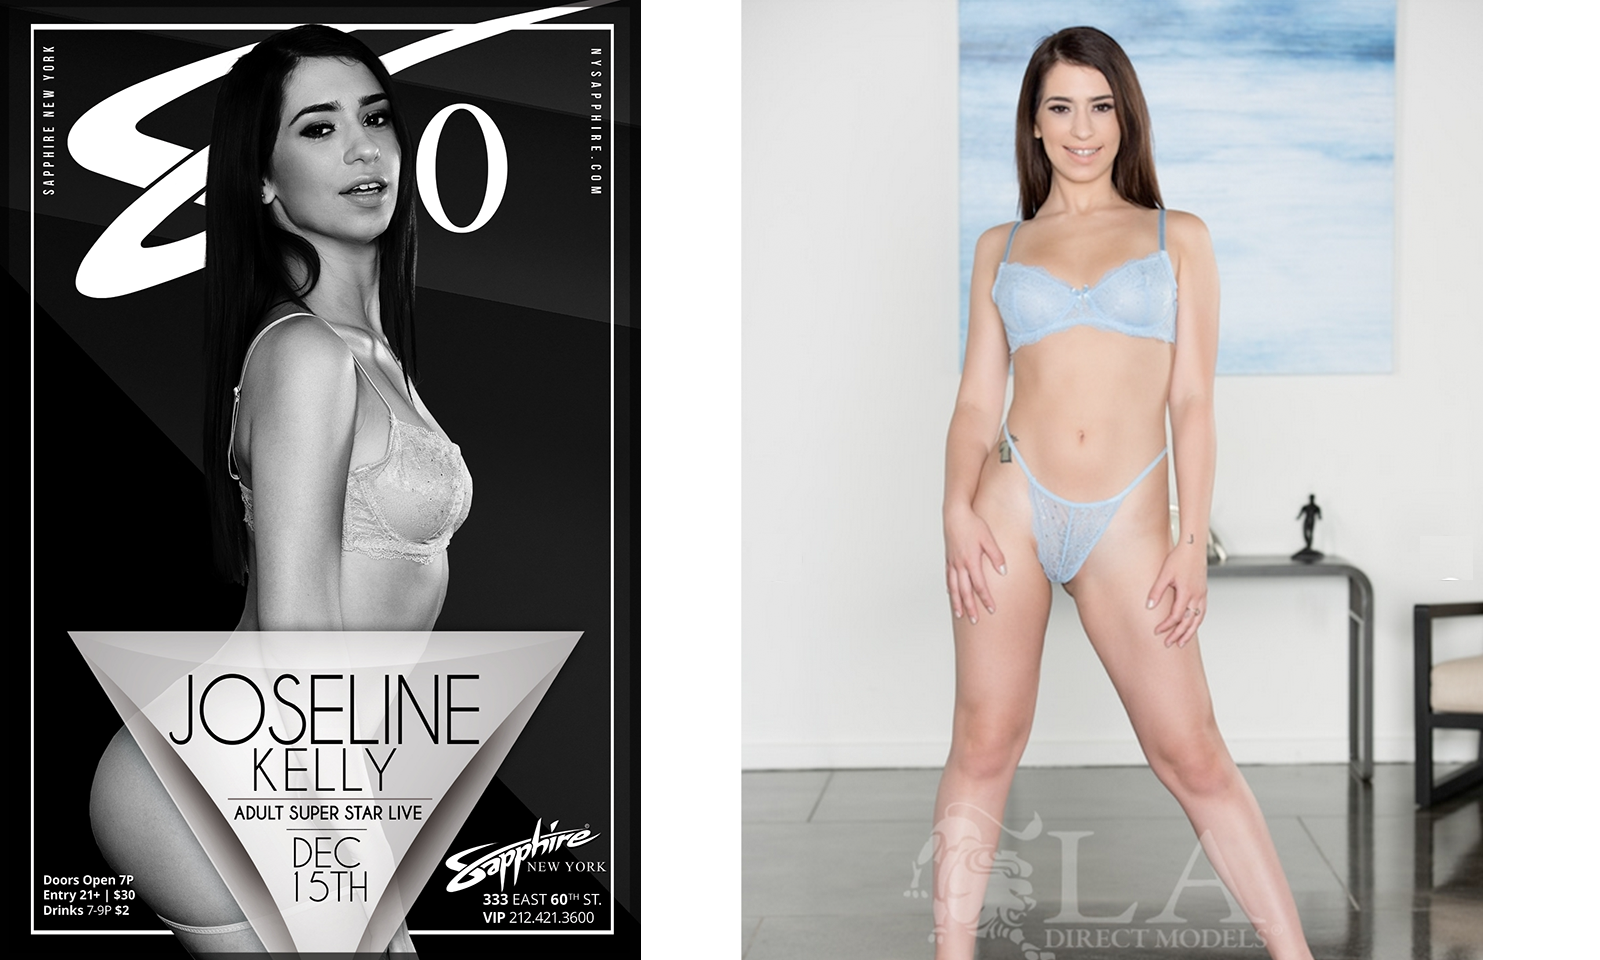 Joseline Kelly To Feature At Sapphire New York Saturday, Dec. 15